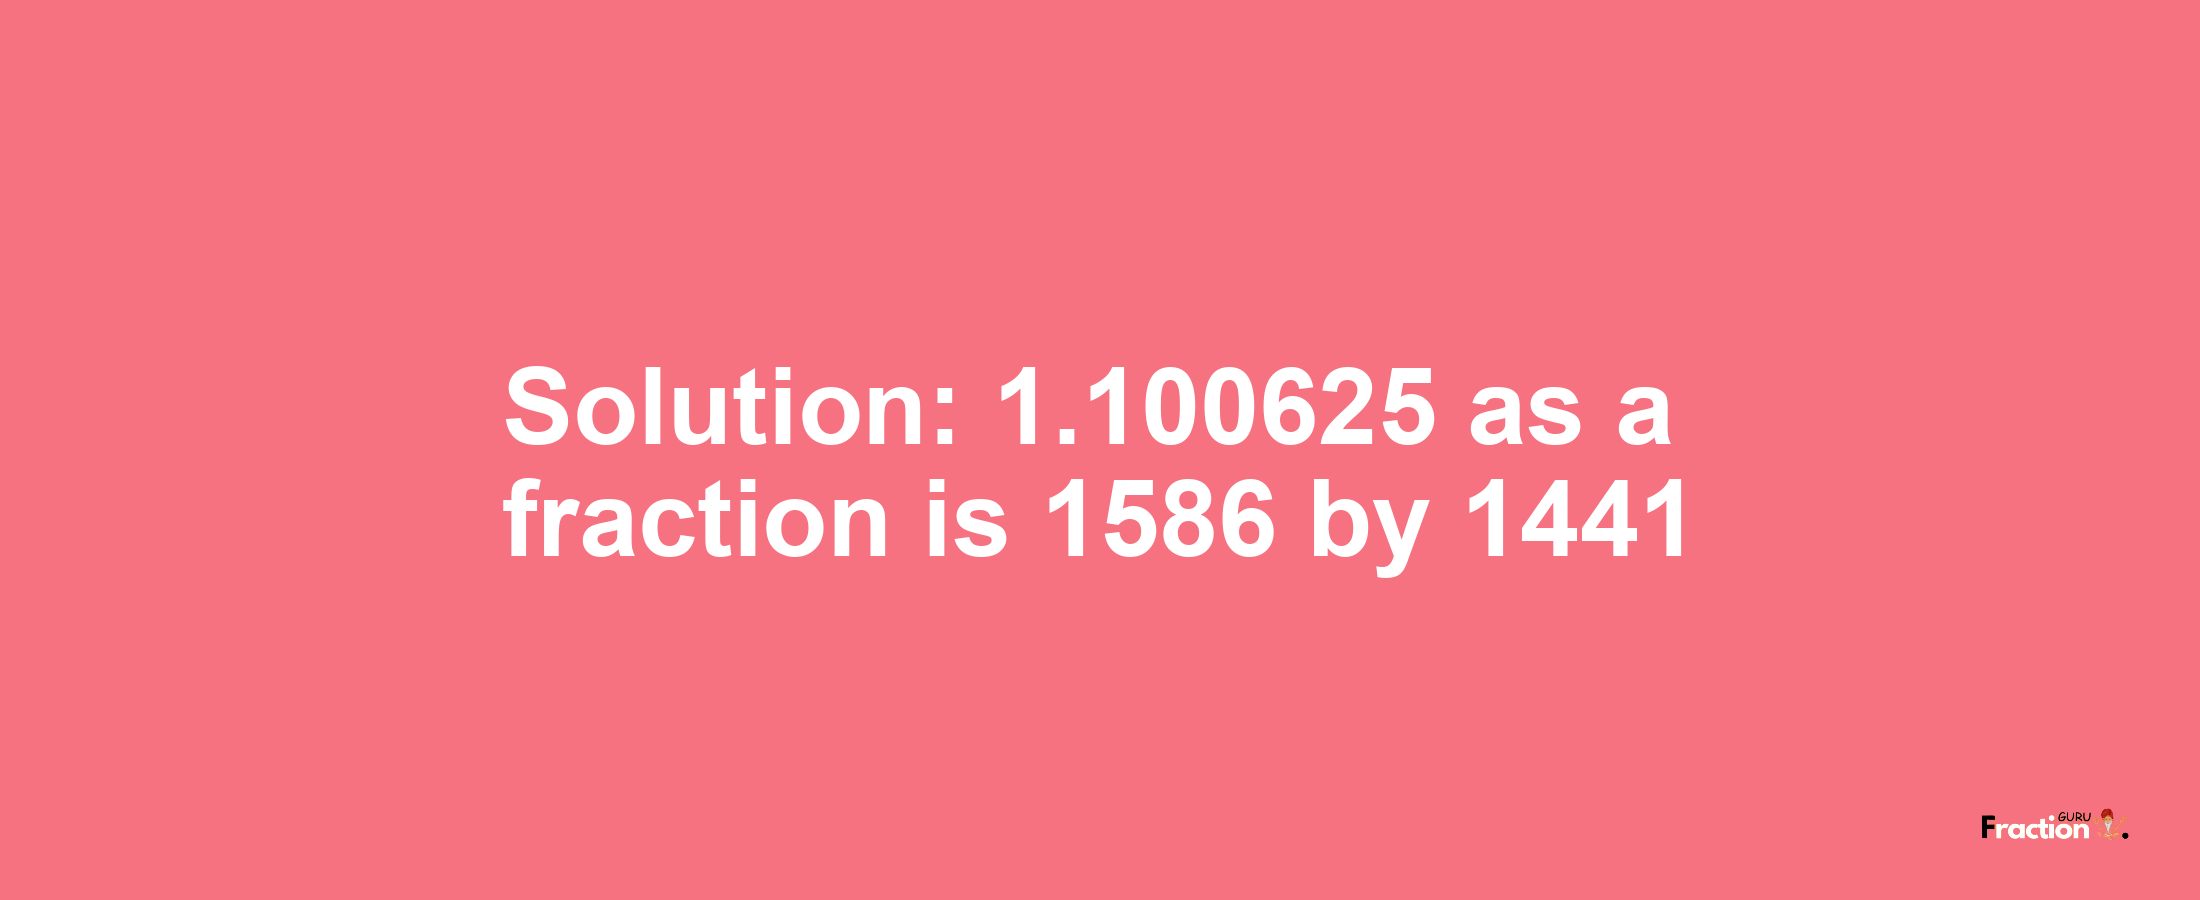 Solution:1.100625 as a fraction is 1586/1441